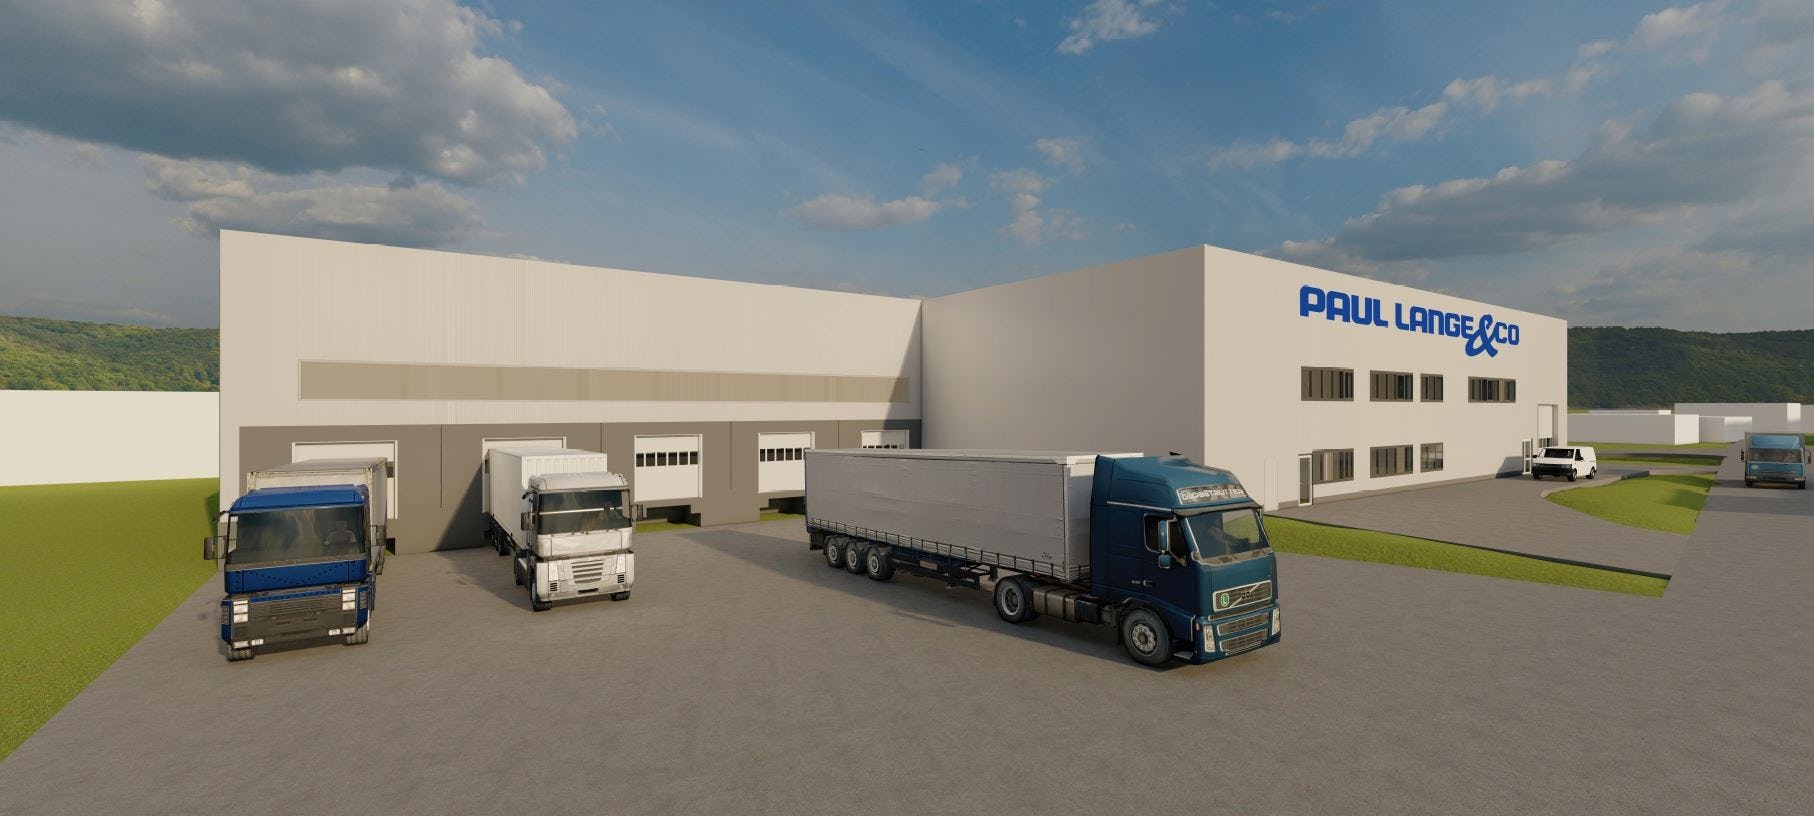 Paul Lange Group is fit for the future with investments in IT and logistics